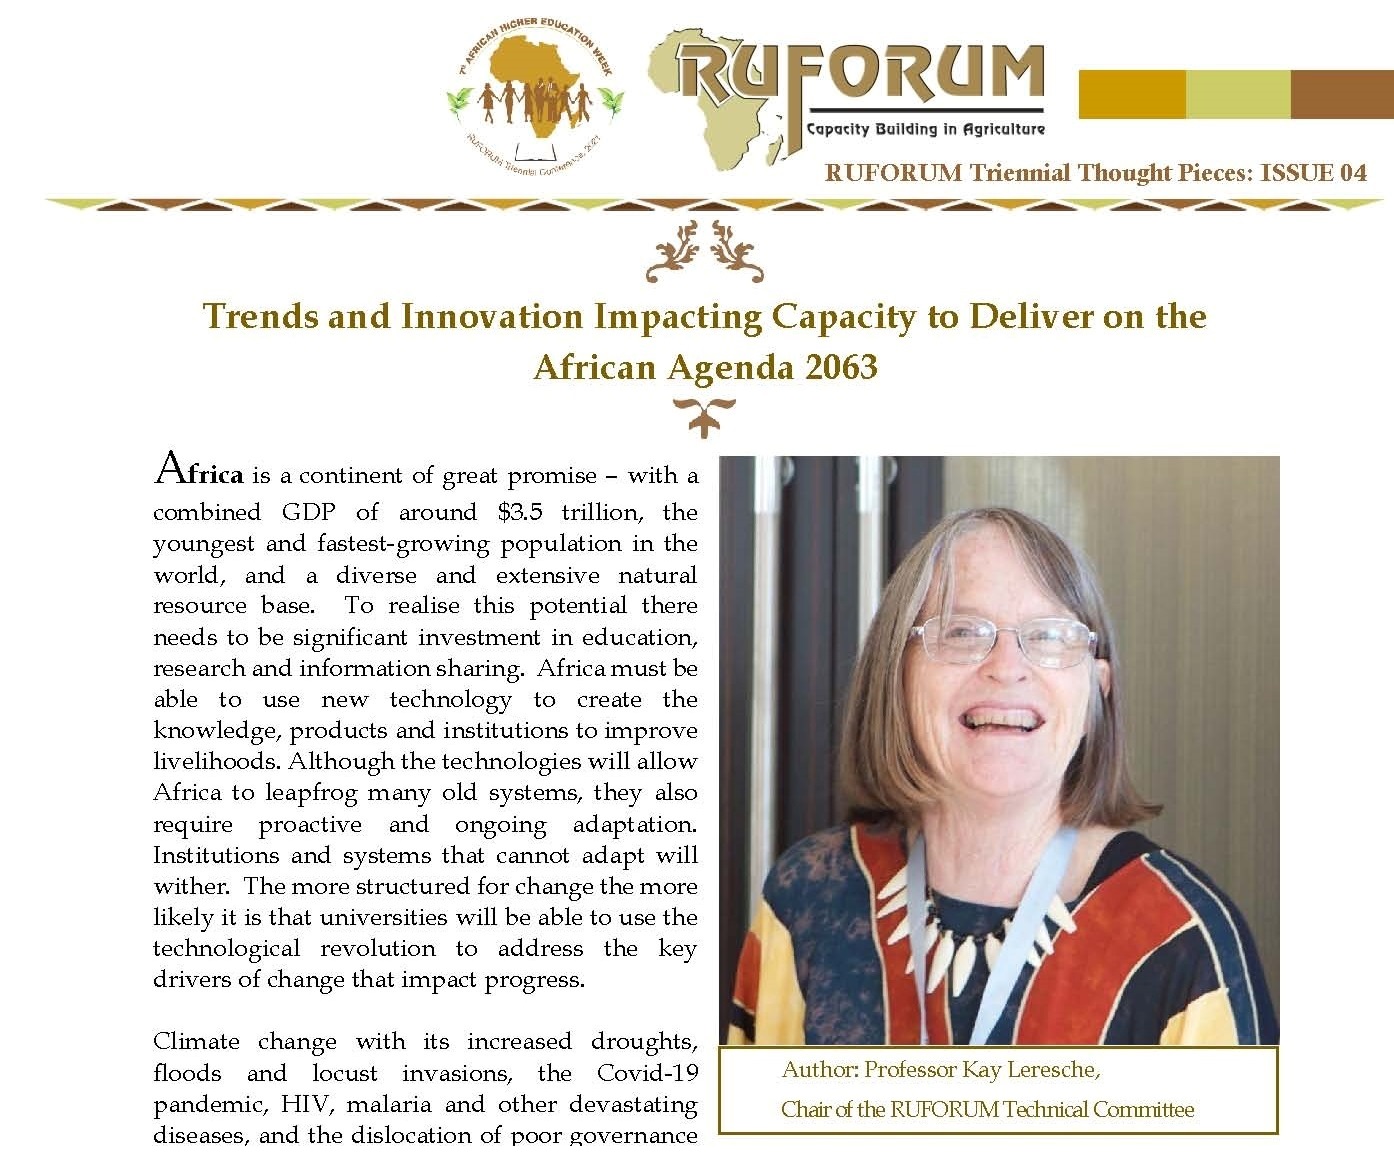 RUFORUM Triennial Thought Pieces: ISSUE 04 by Prof. Kay Leresche, Chair of the RUFORUM Technical Committee.